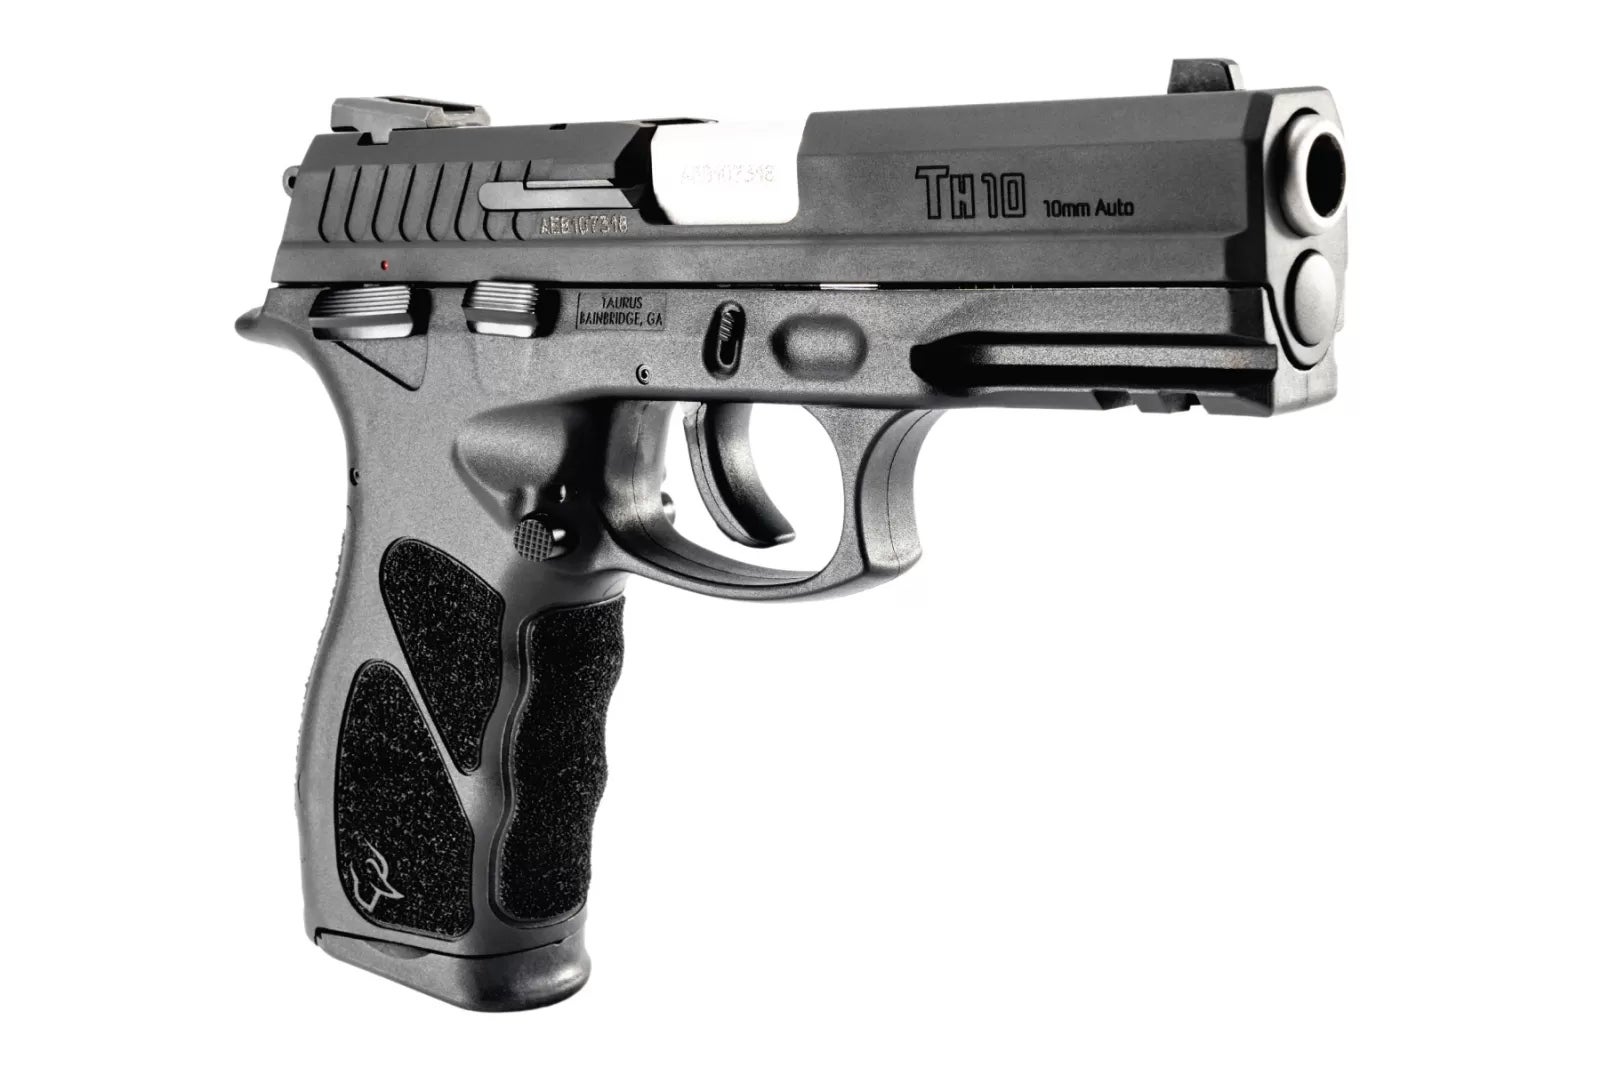 Best Millimeter Finally Comes to Taurus - Introducing the new Taurus TH10